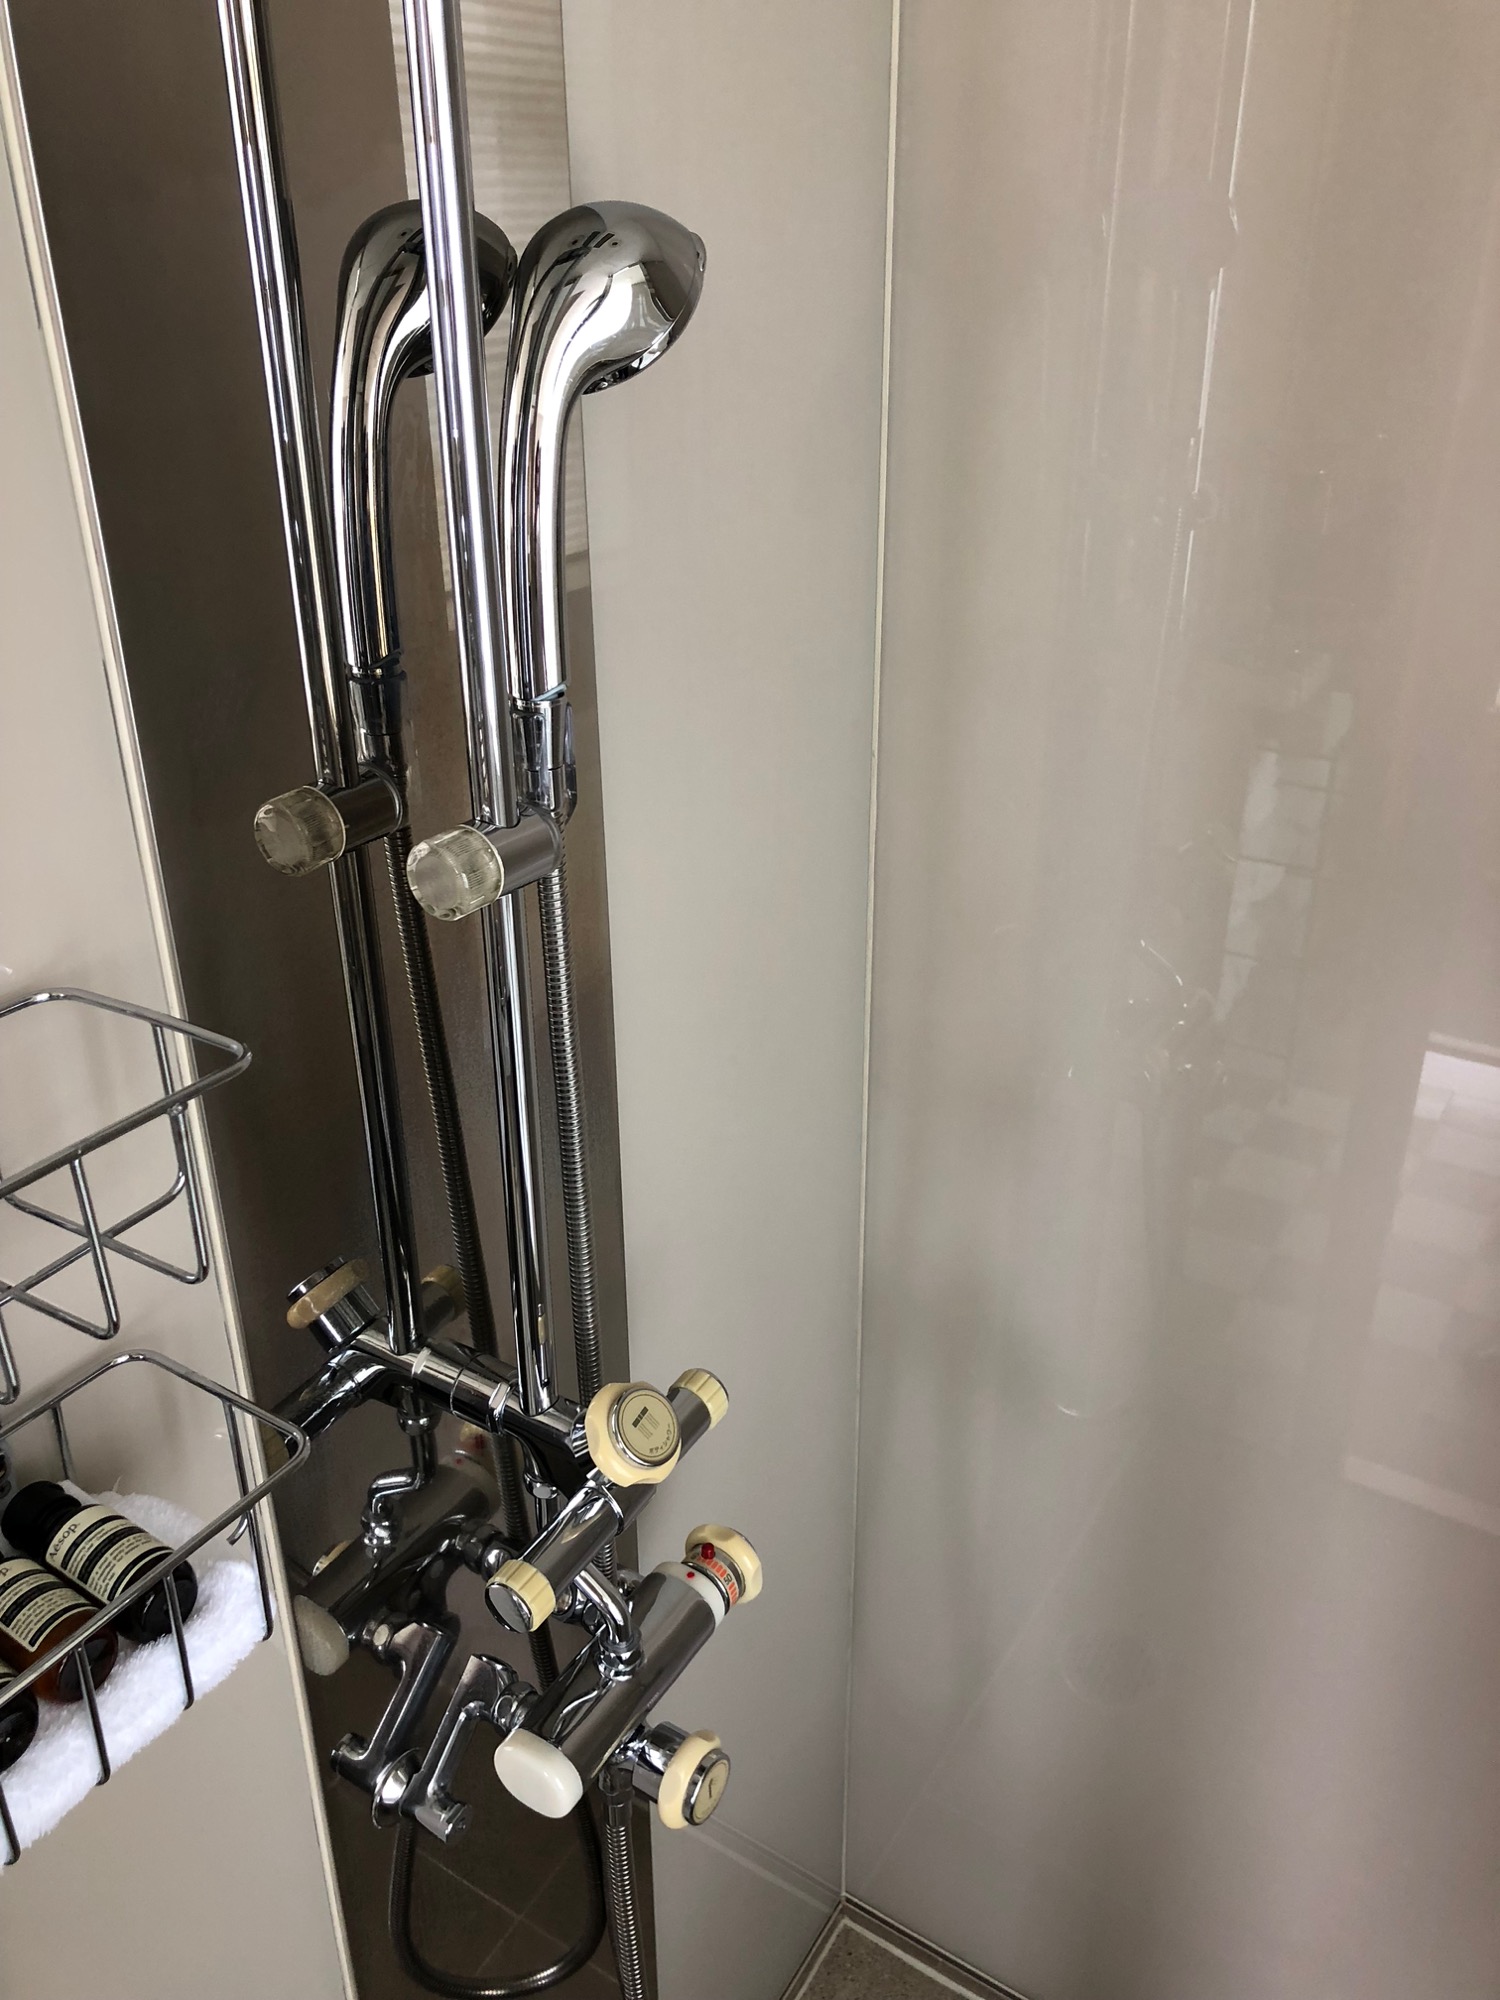 a shower head with nozzles